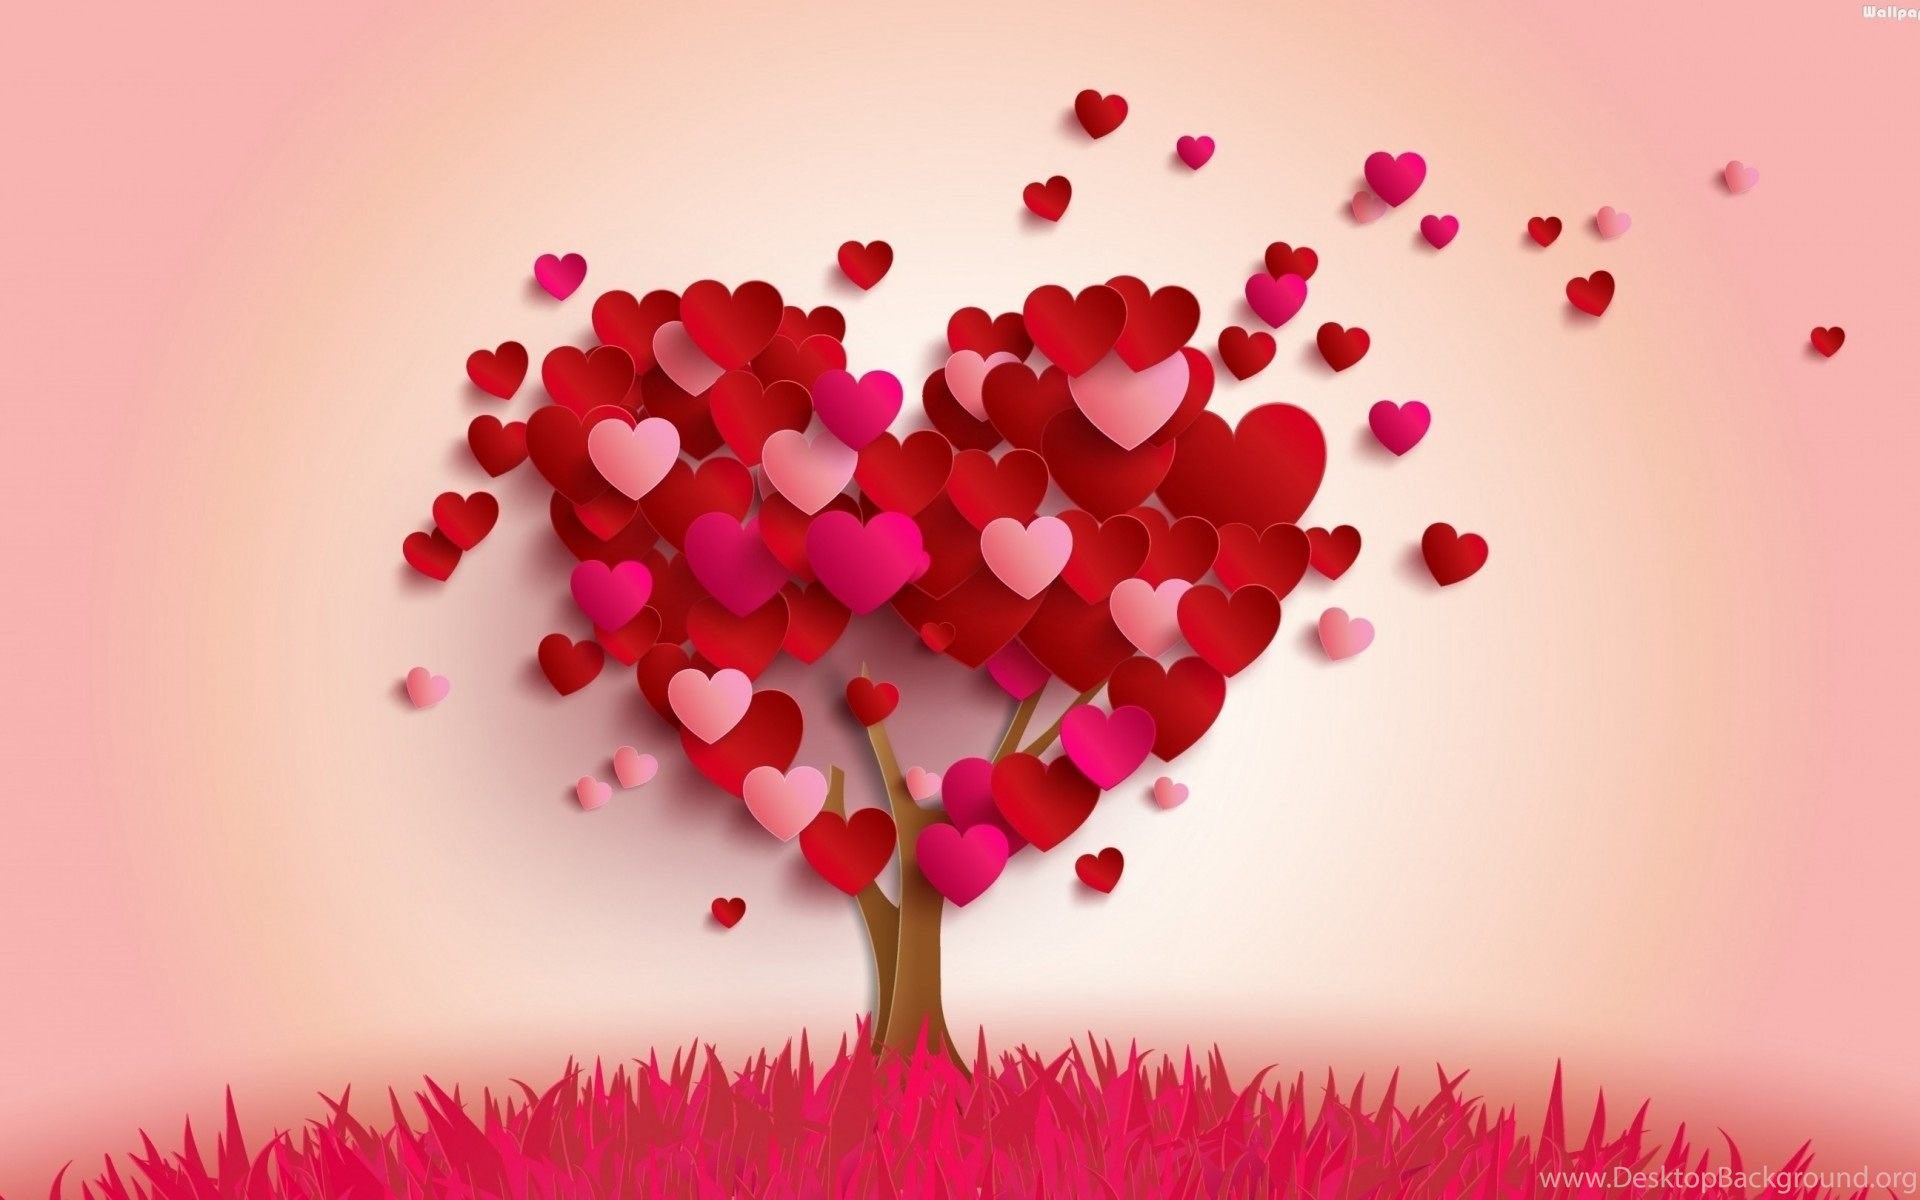 love video wallpaper download,heart,pink,valentine's day,red,love